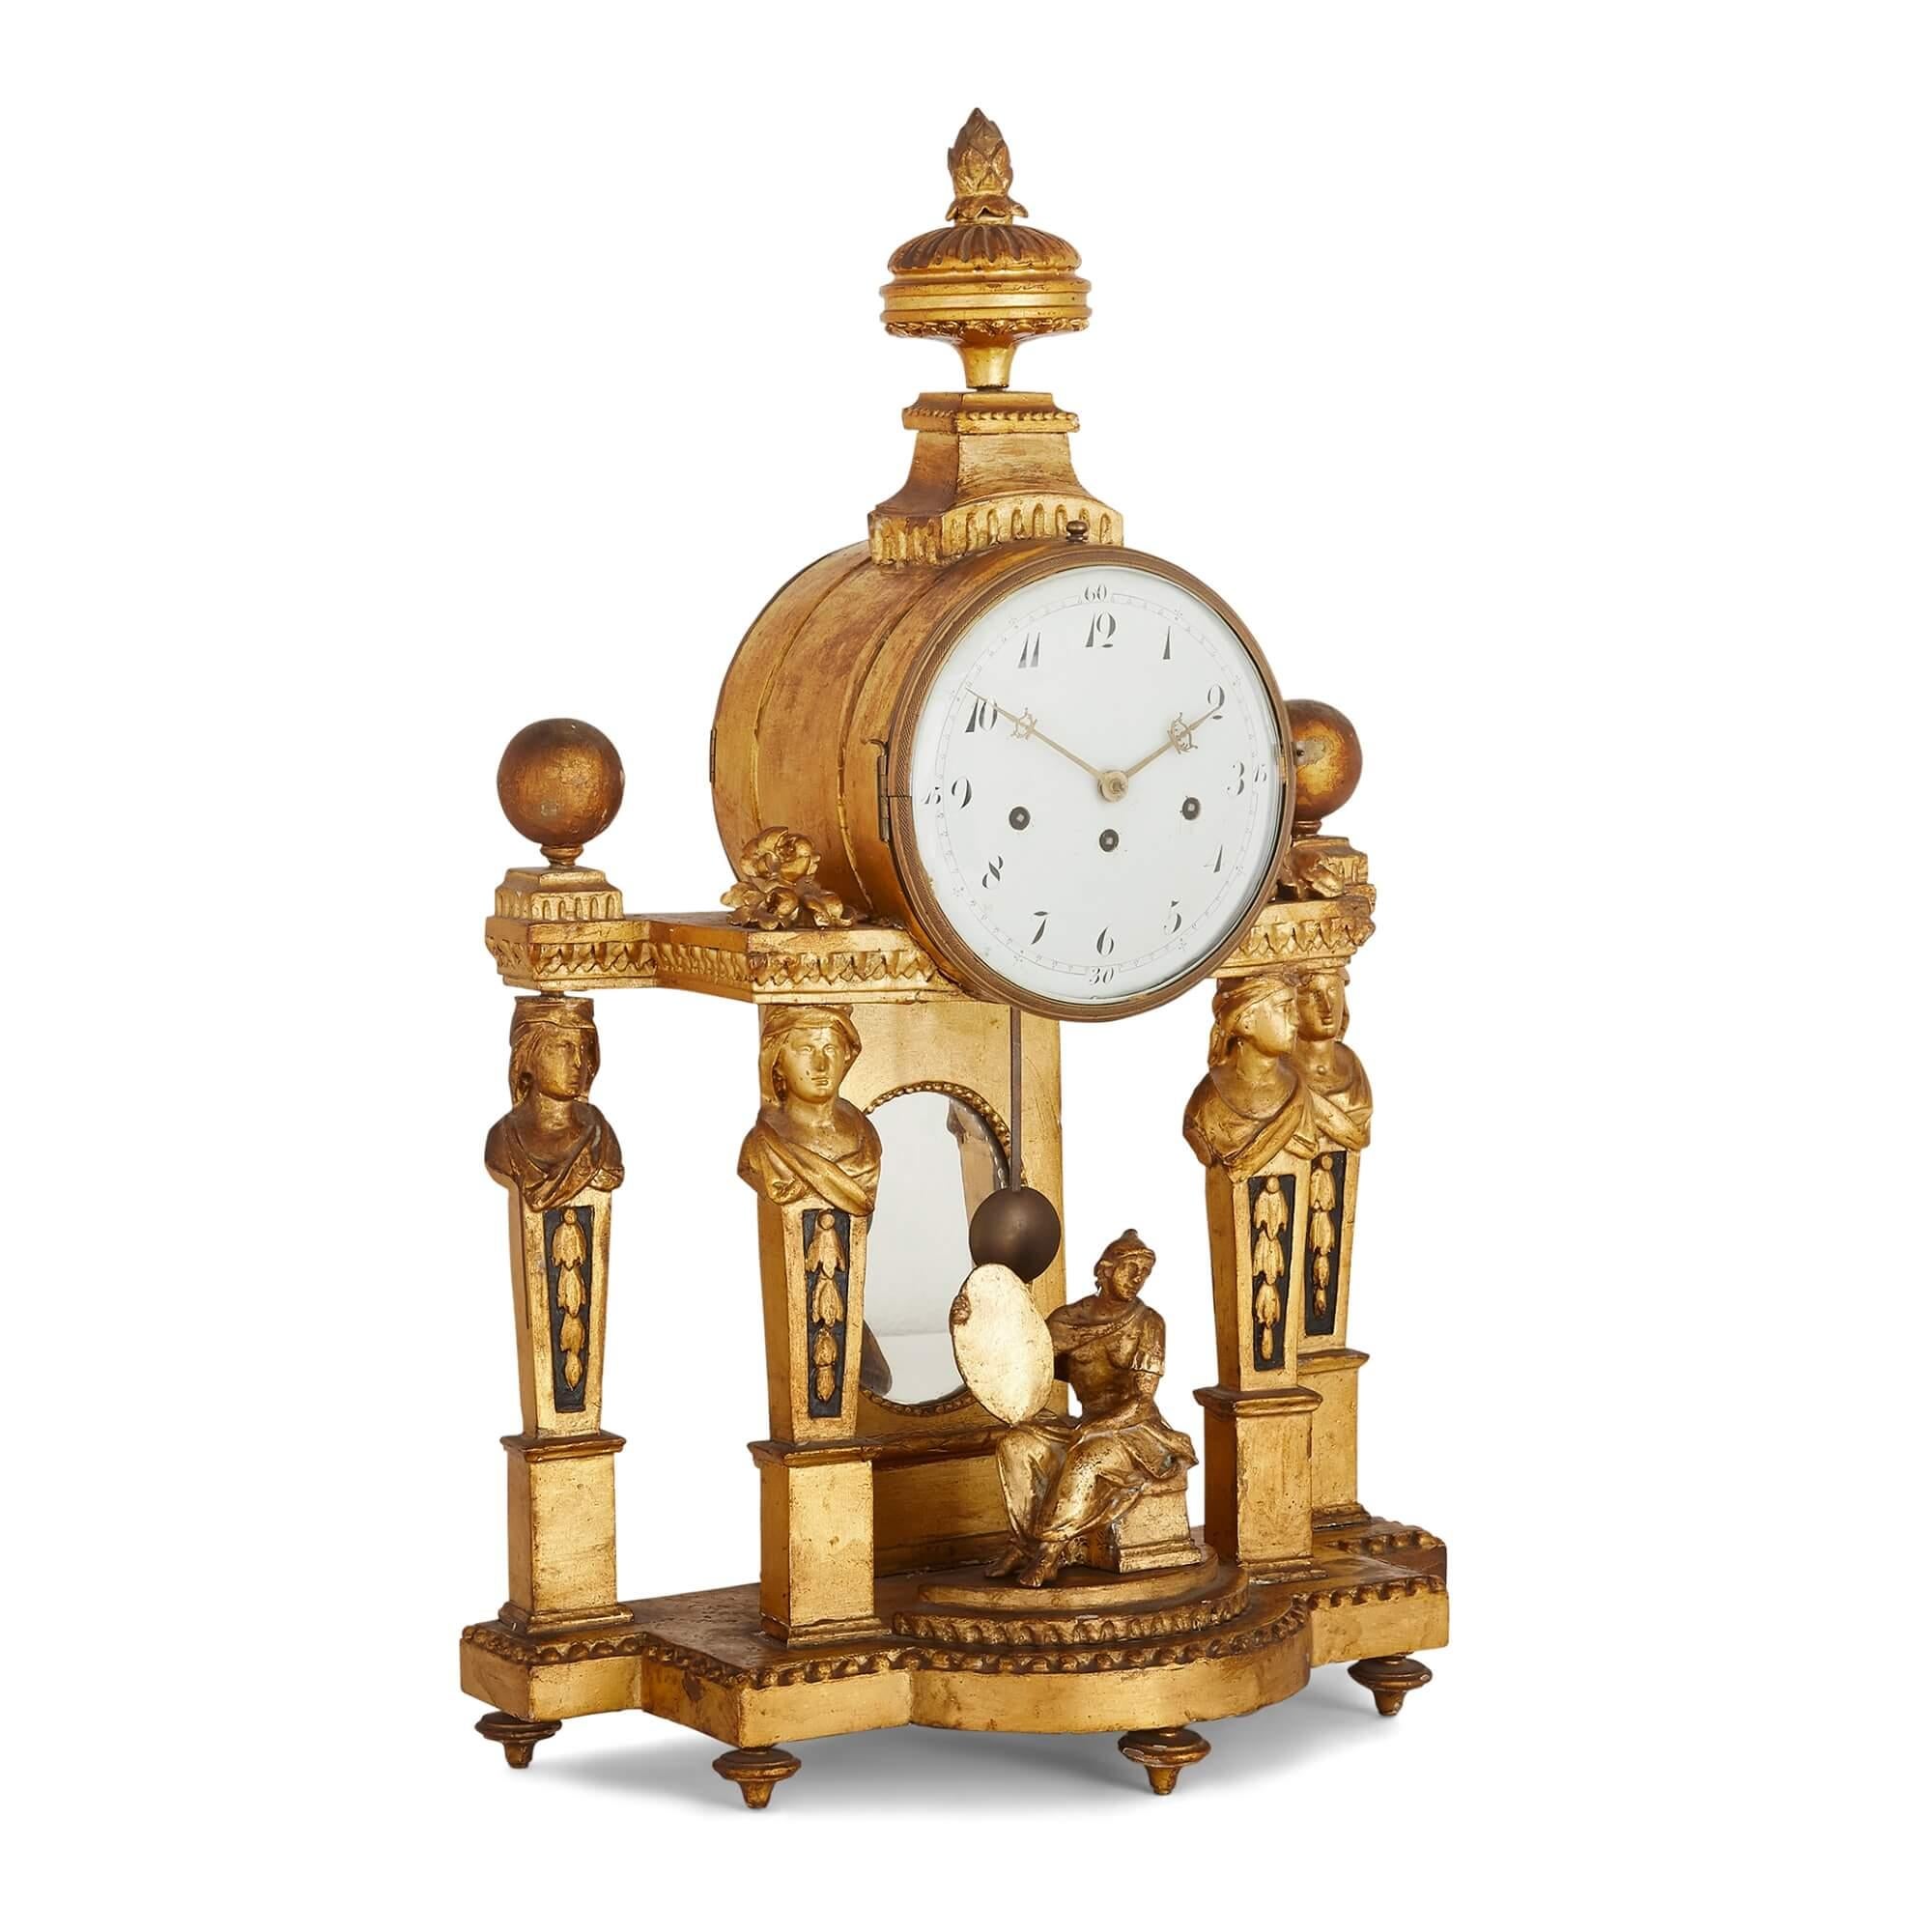 French Louis XVI style carved giltwood mantel clock
French, early 20th Century
Height 60cm, width 39cm, depth 18cm

This elegant mantel clock is crafted from giltwood and designed in a classical style. The clock features a large circular enamel dial